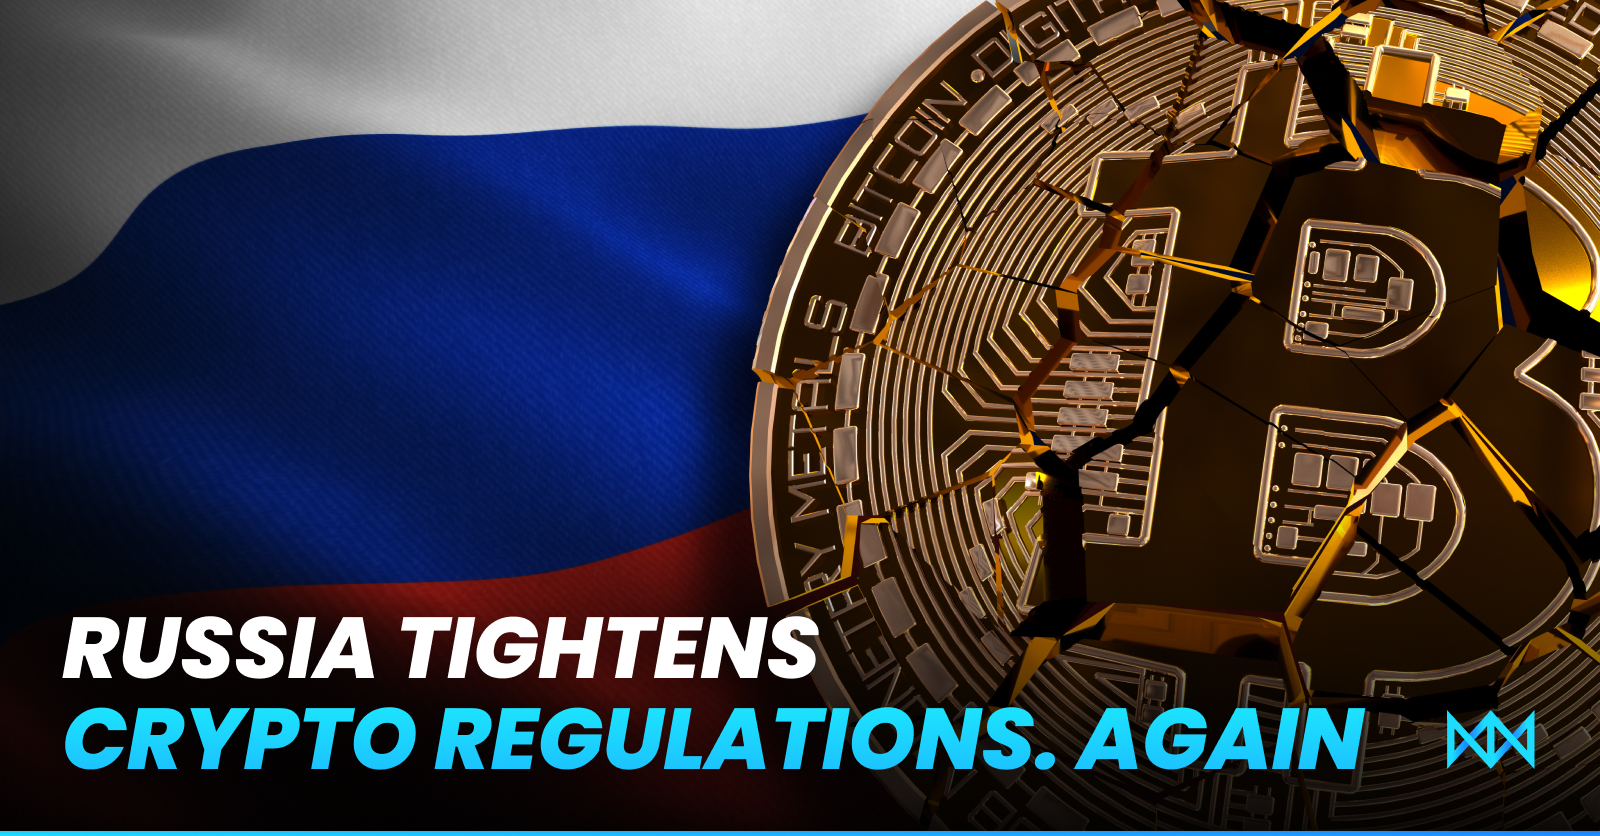 Russia Tightens Cryptocurrency Regulation